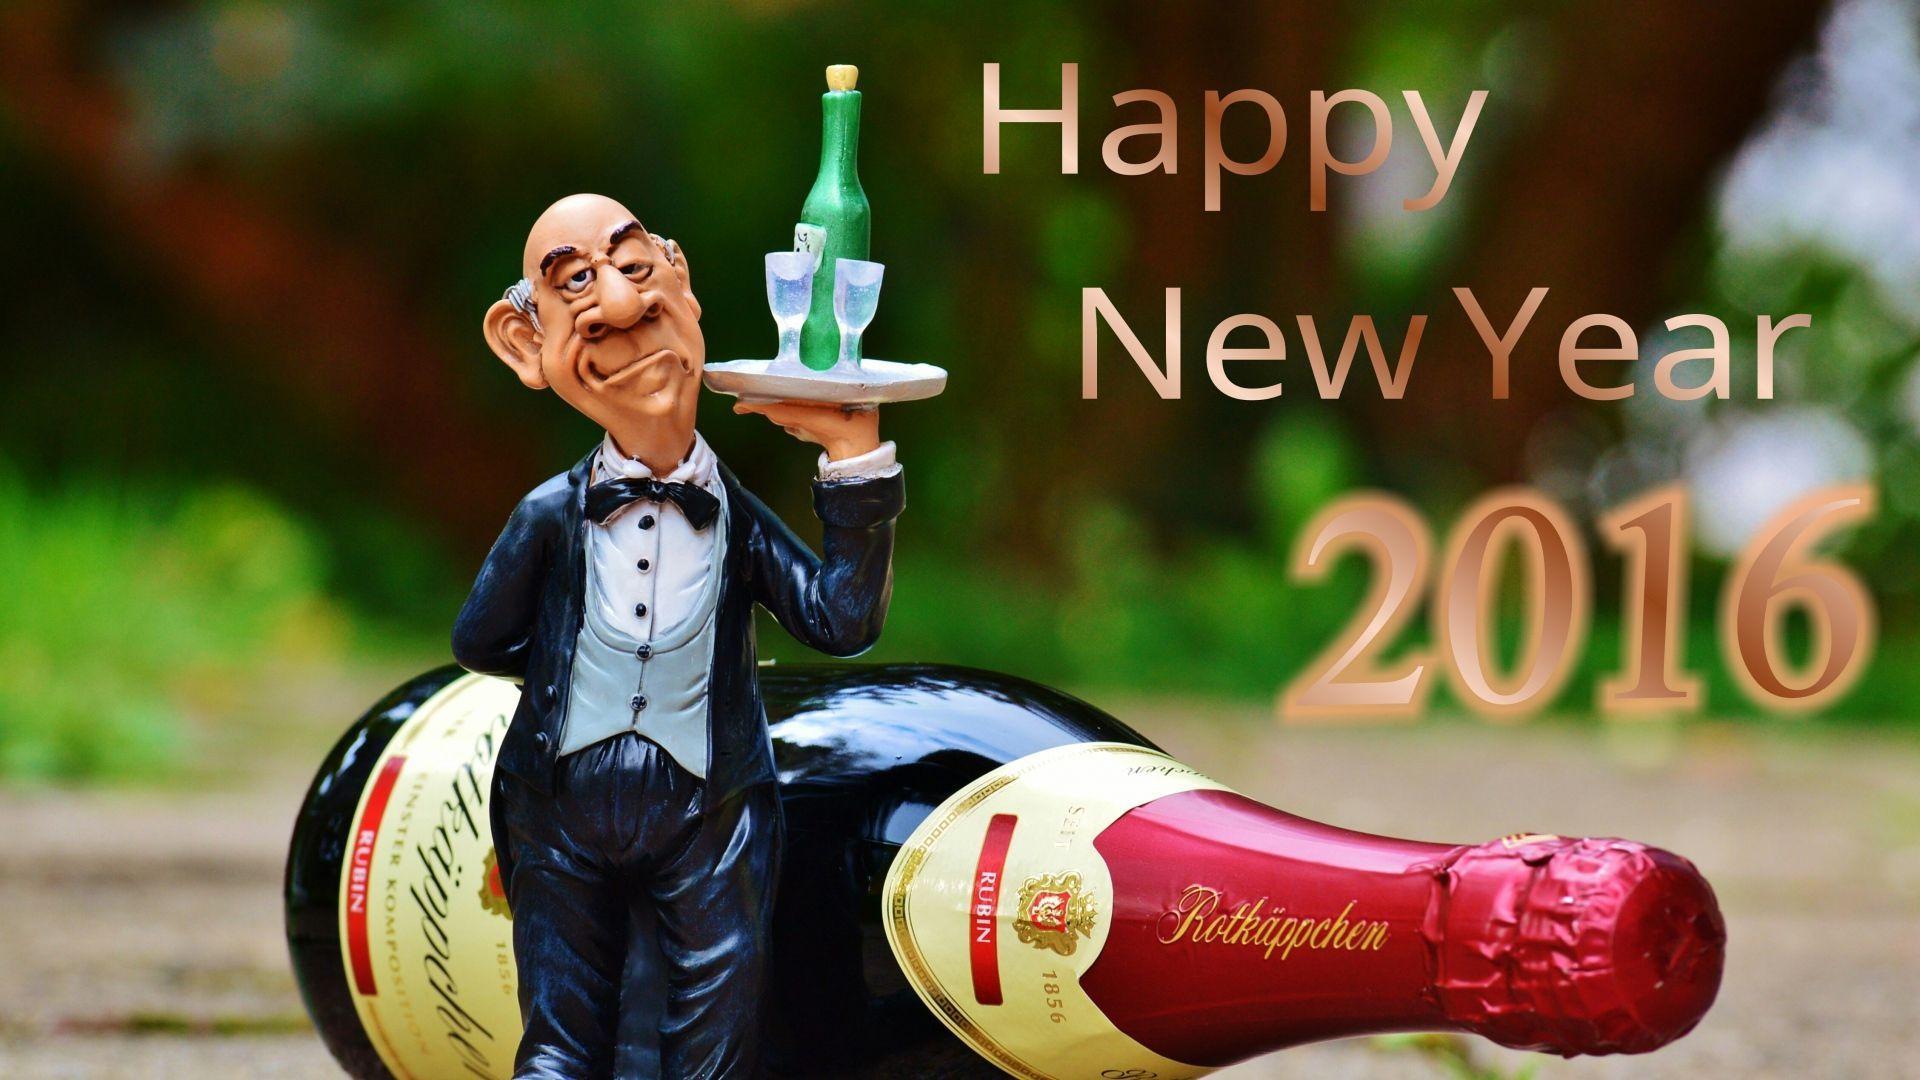 Download Wallpaper 1920x1080 New year, Waiter, Champagne